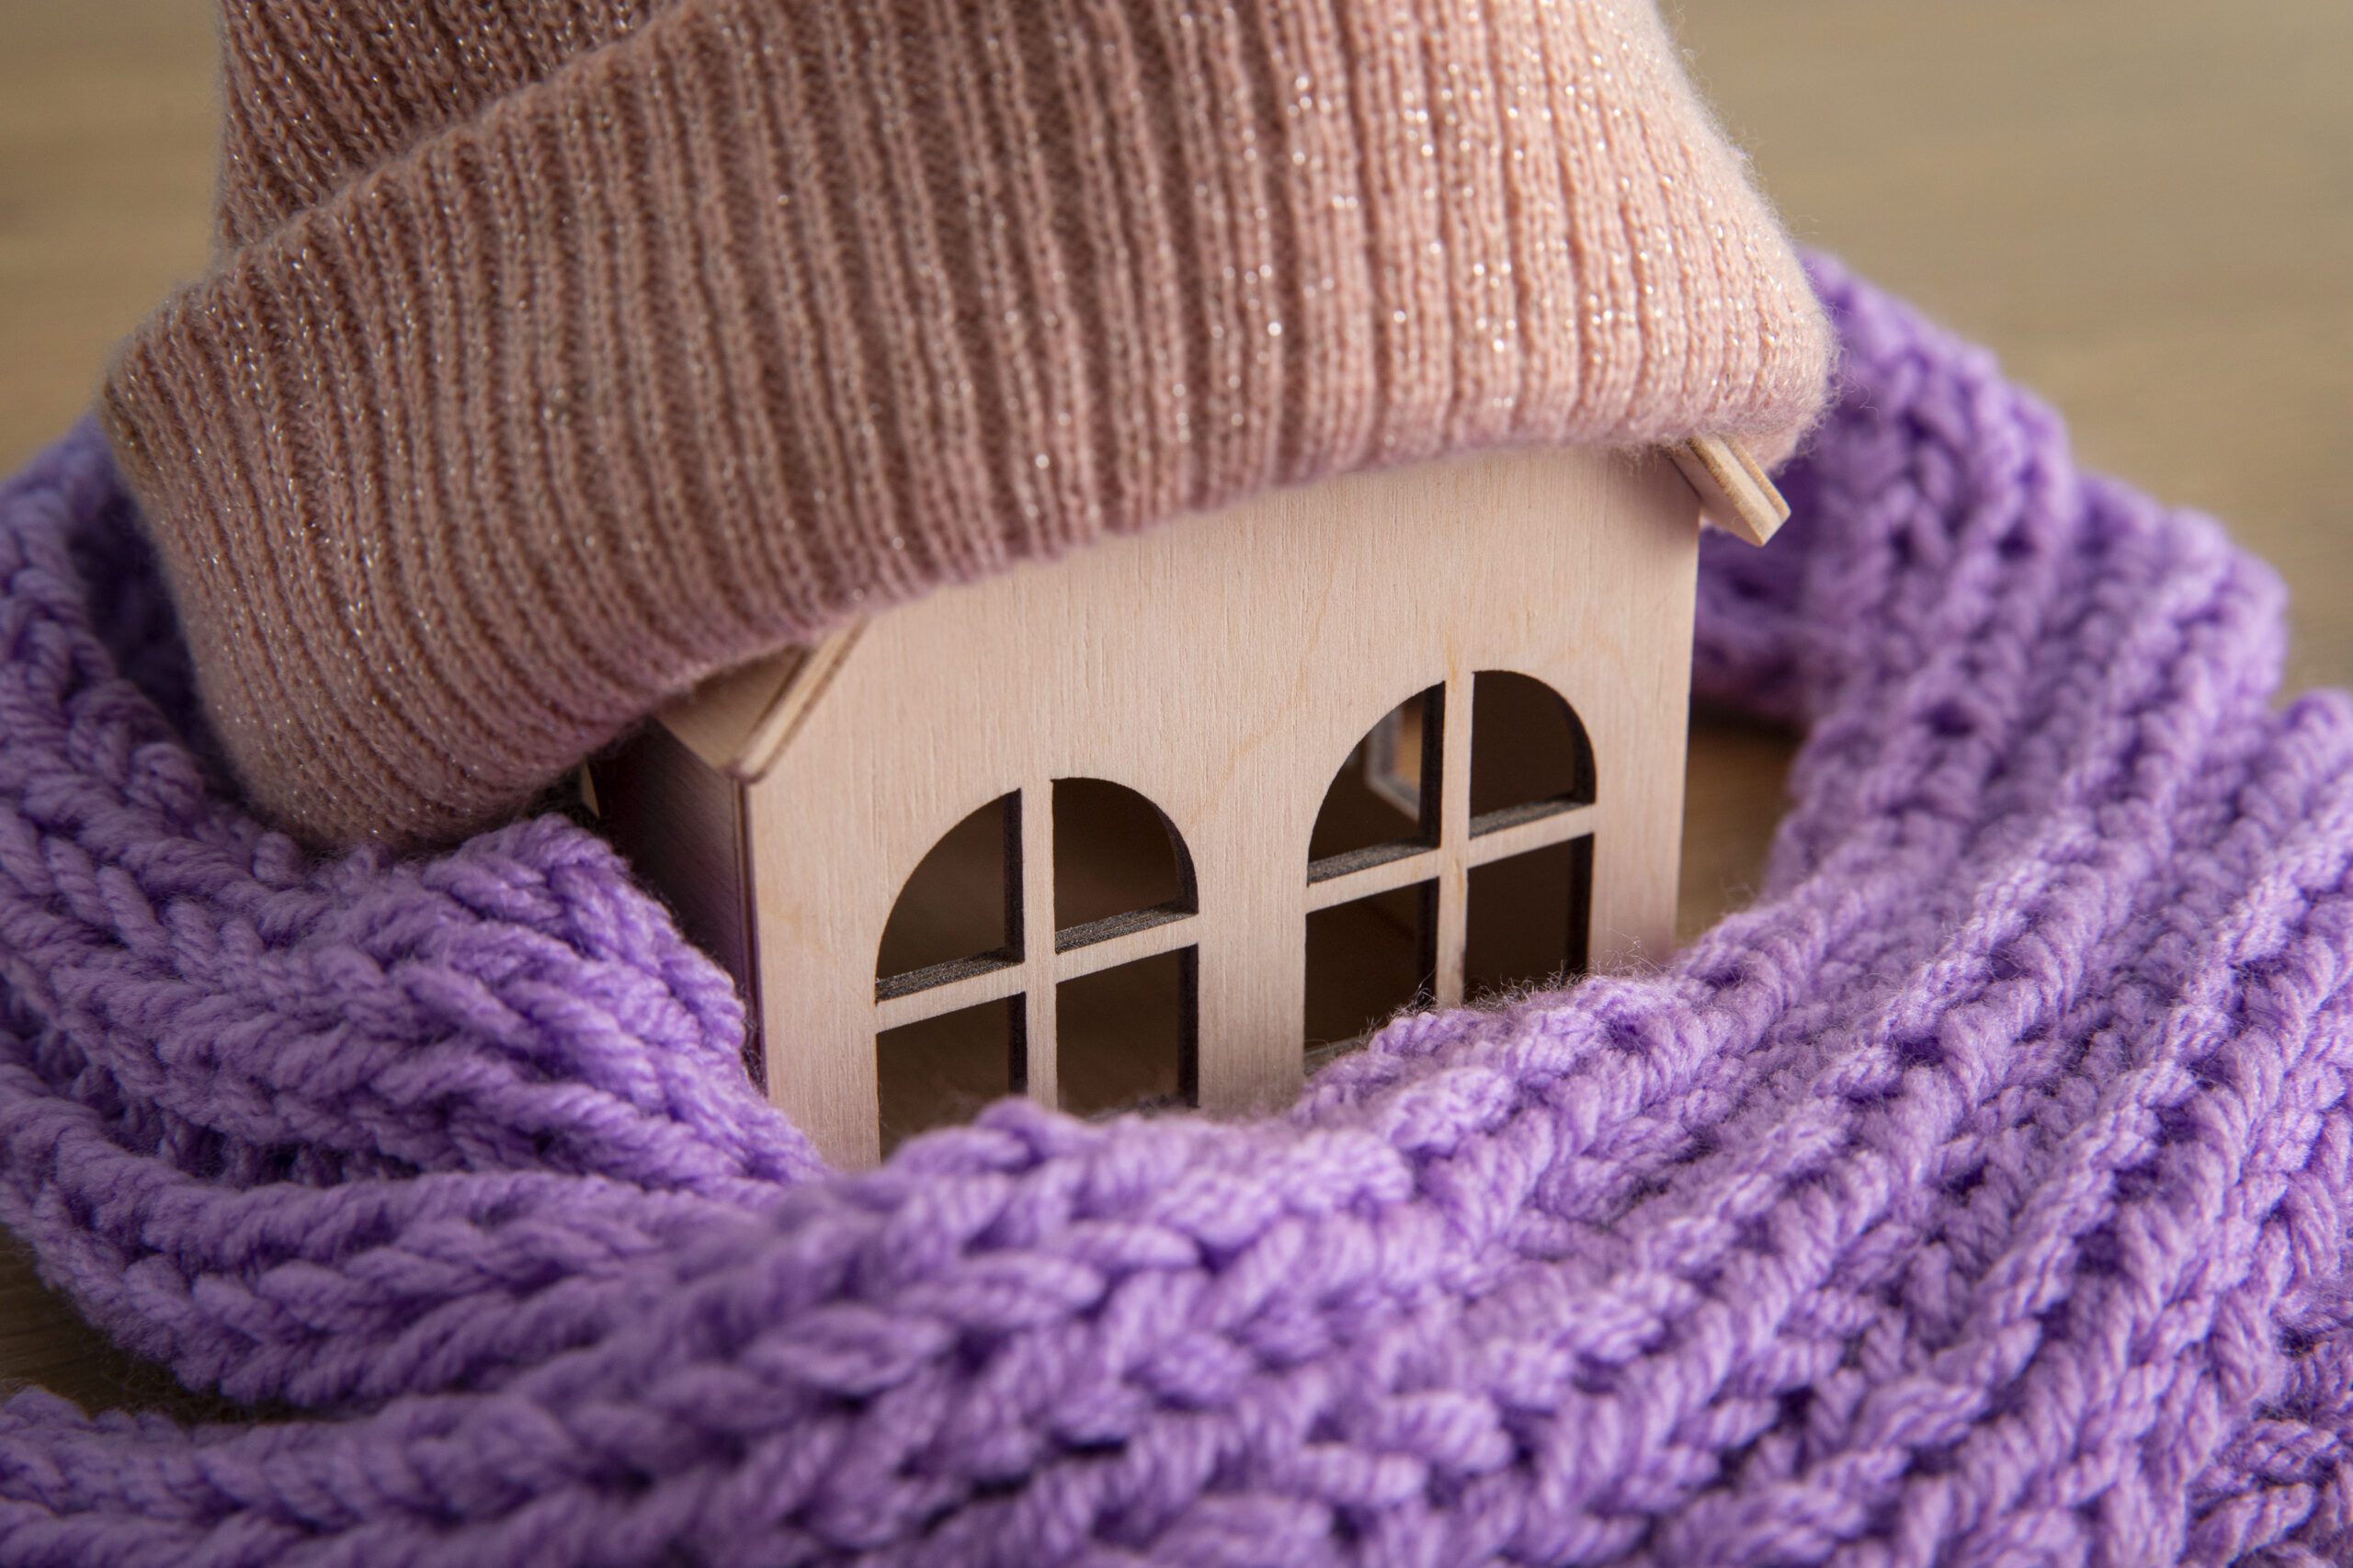 How do you protect your home in winter in Brooklyn, Queens, and Long Island?